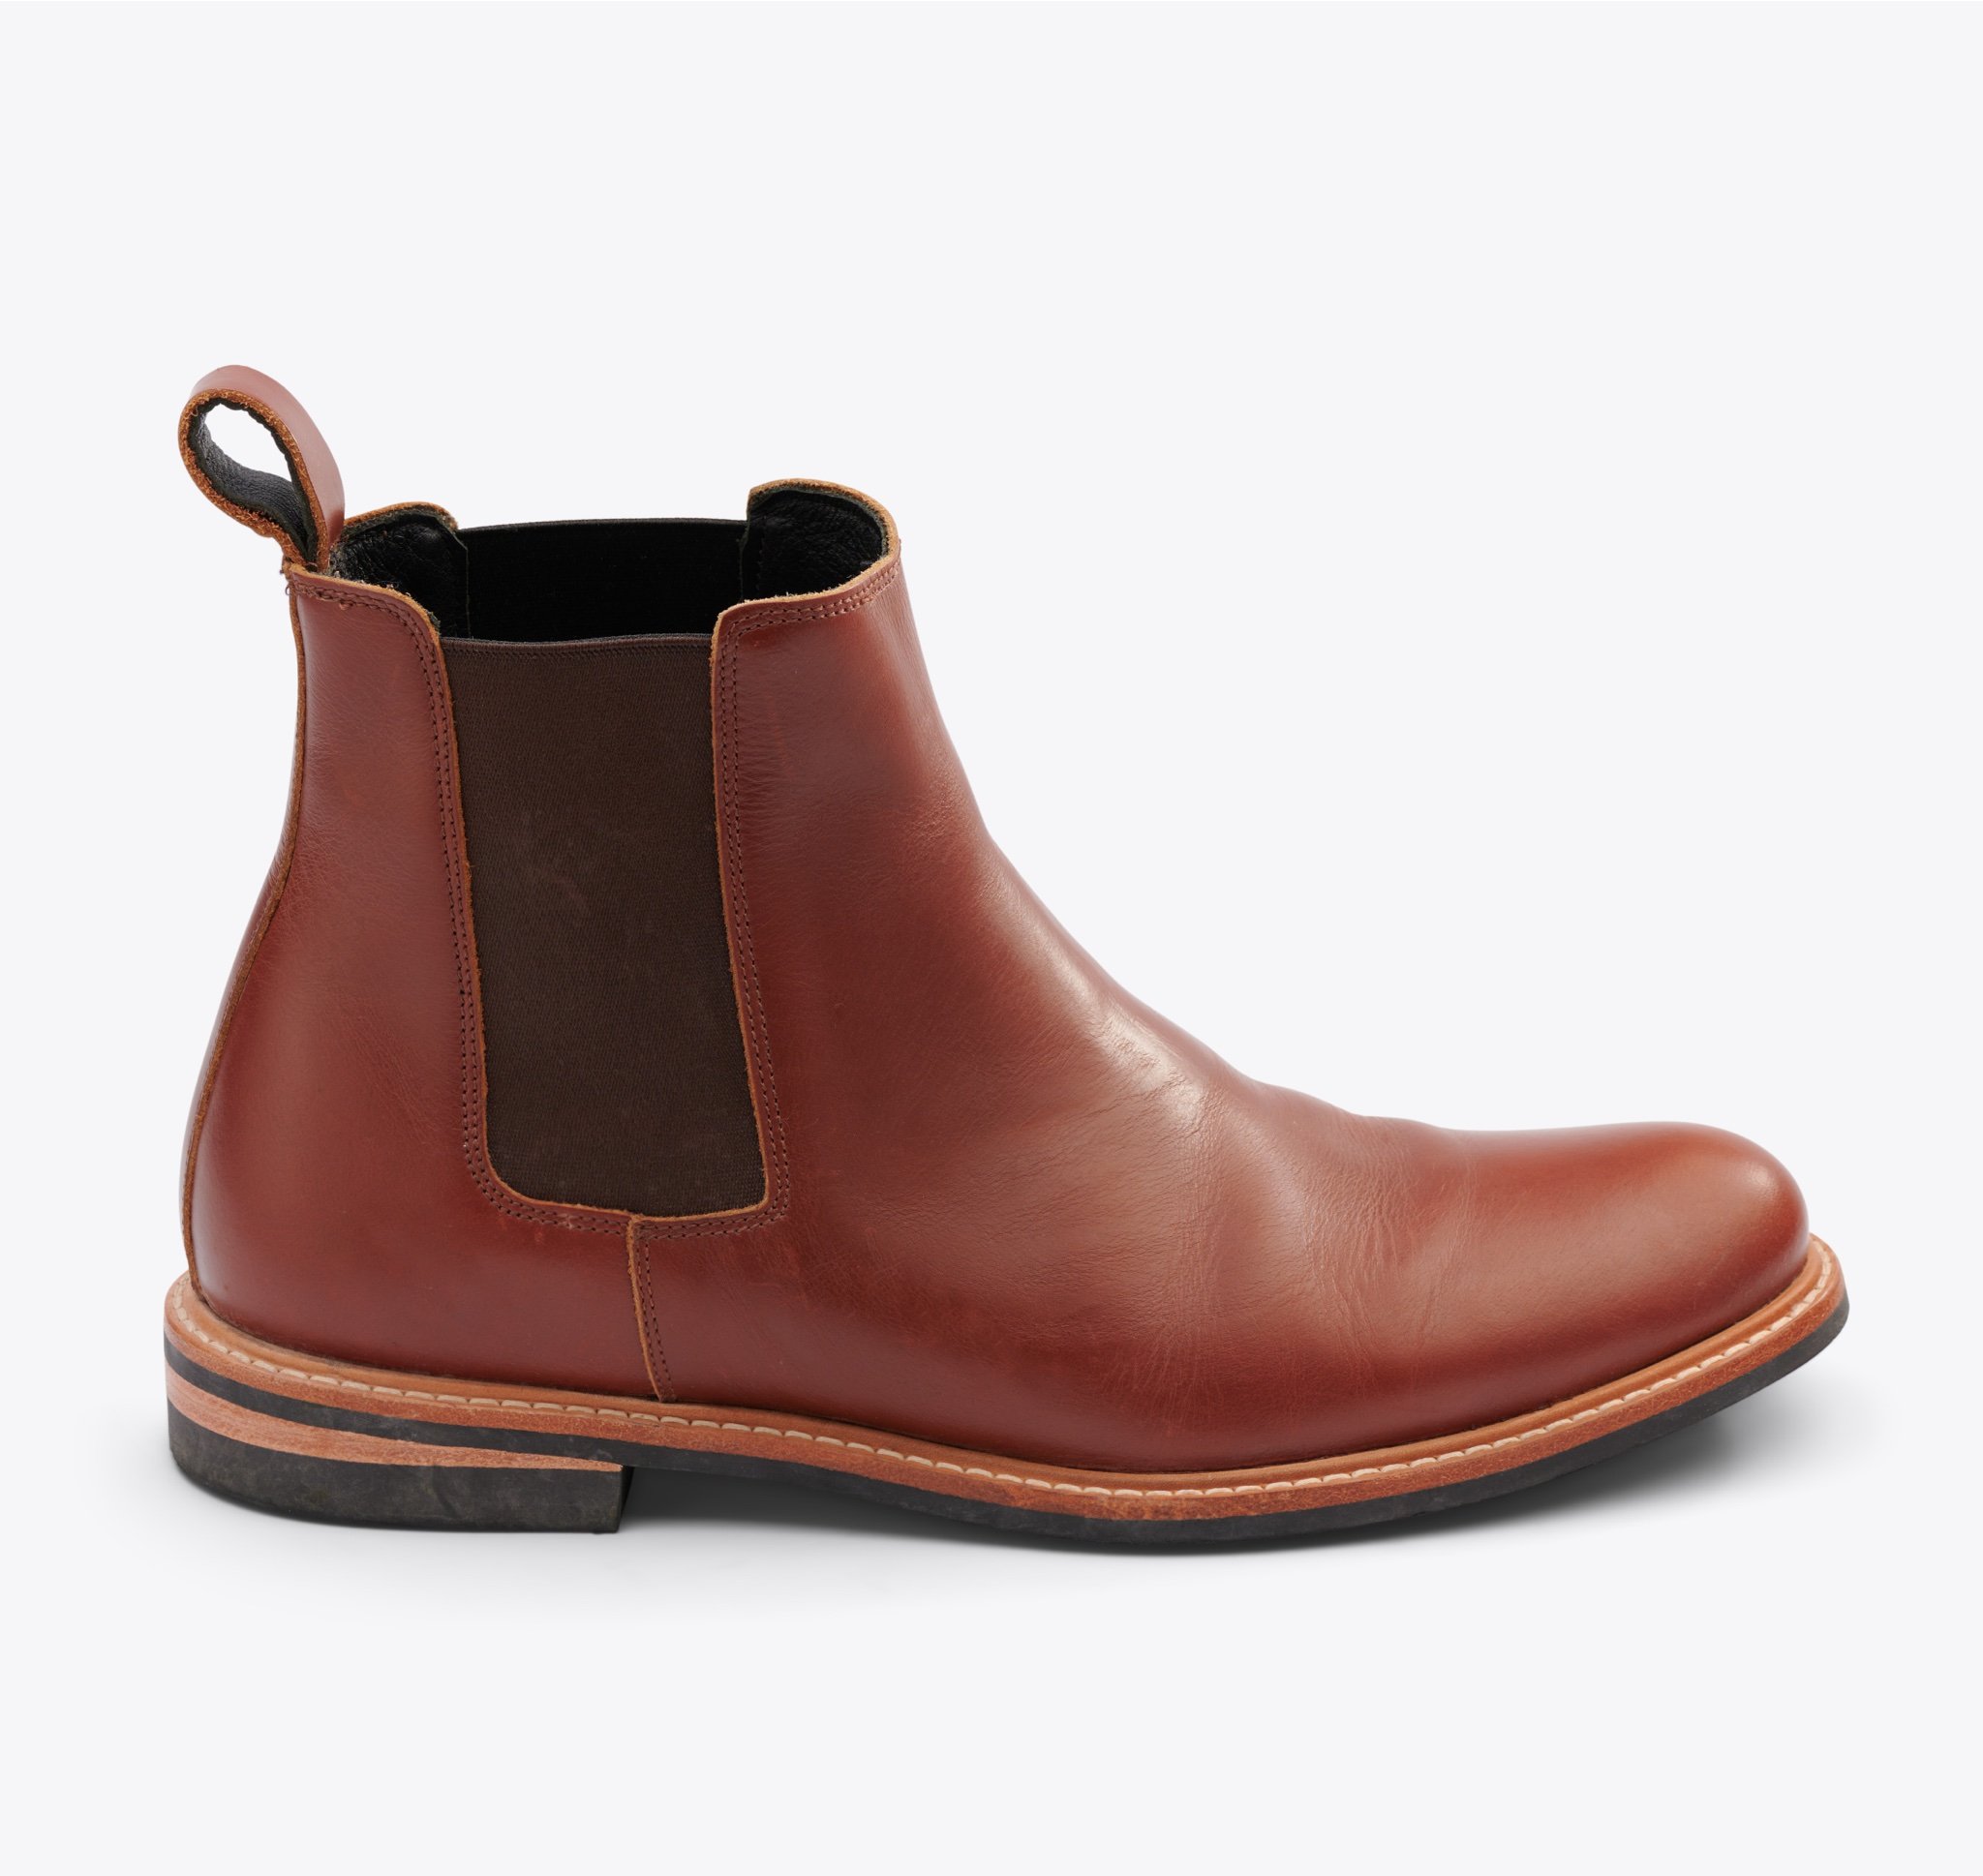 Nisolo All-Weather Chelsea Boot Brandy - Every Nisolo product is built on the foundation of comfort, function, and design. 